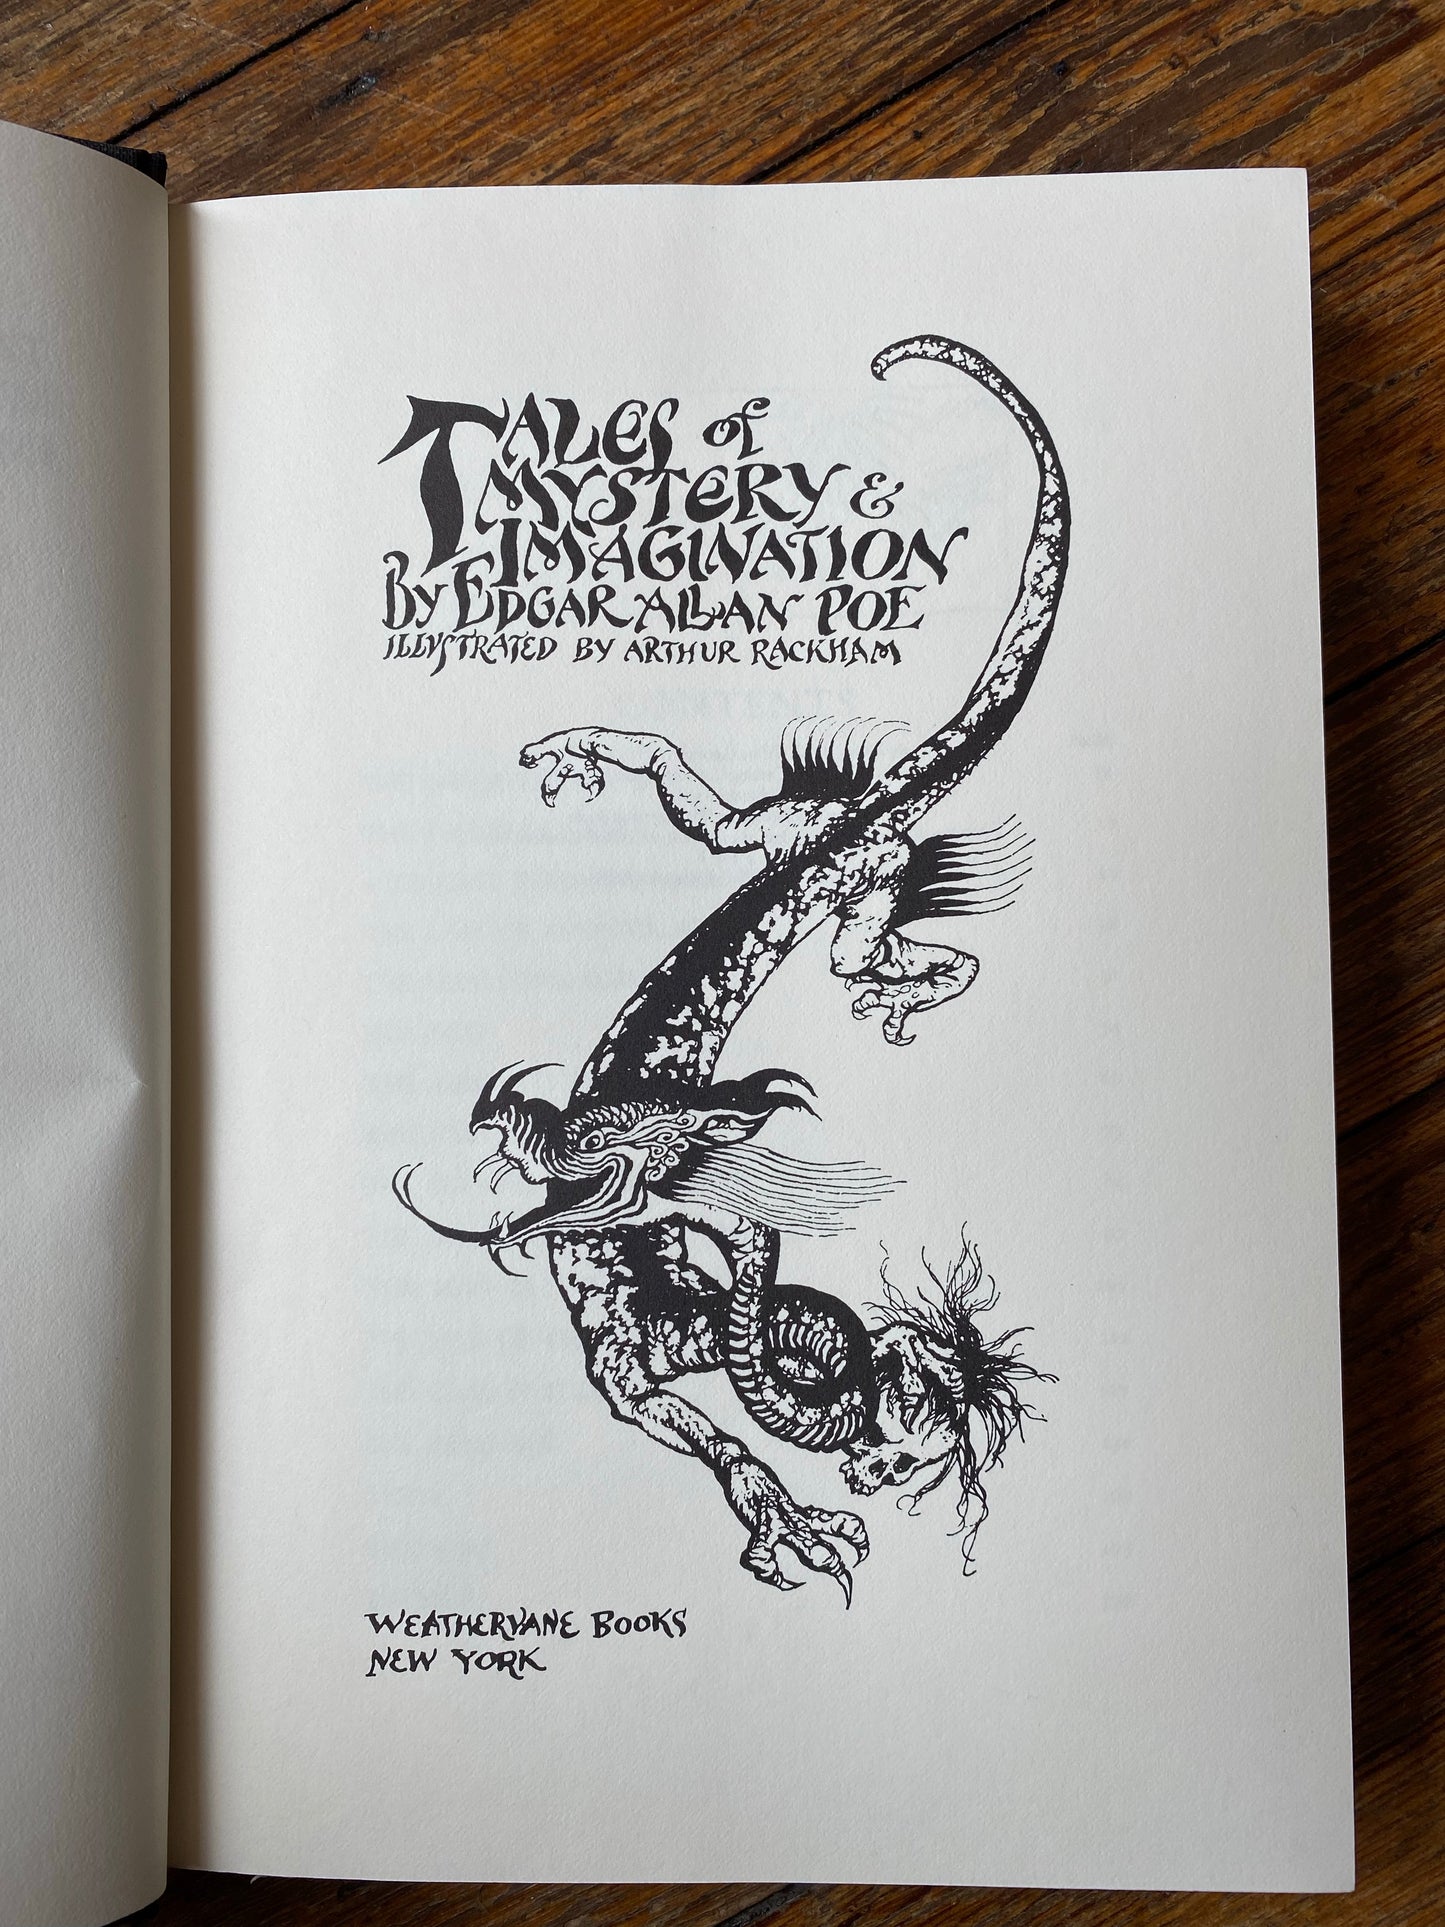 Poe’s Tales of Mystery & Imagination Illustrated by Arthur Rackham